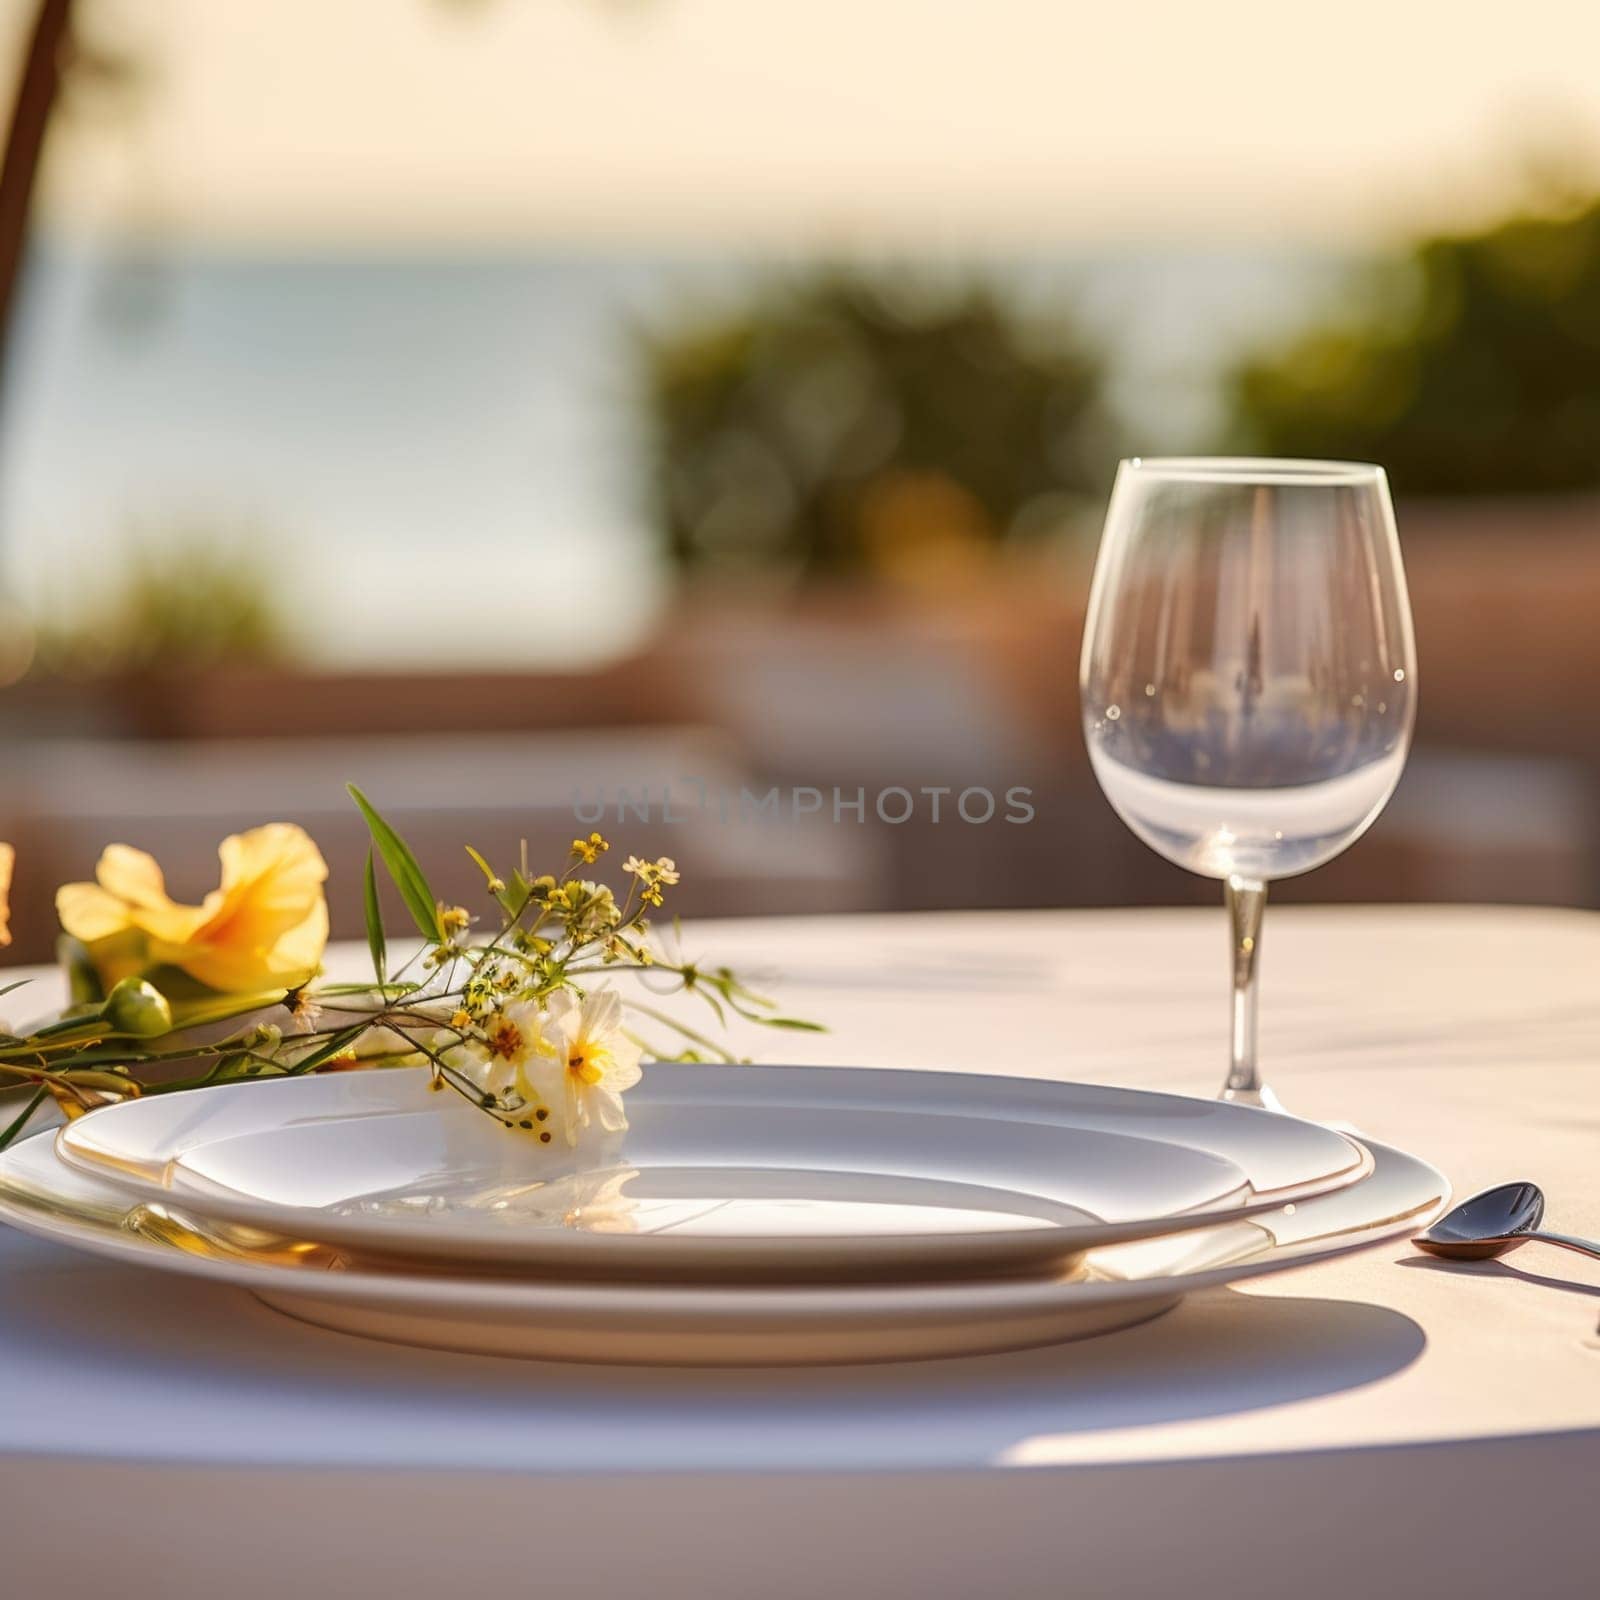 A white plate with flowers and a glass of wine on a table, AI by starush